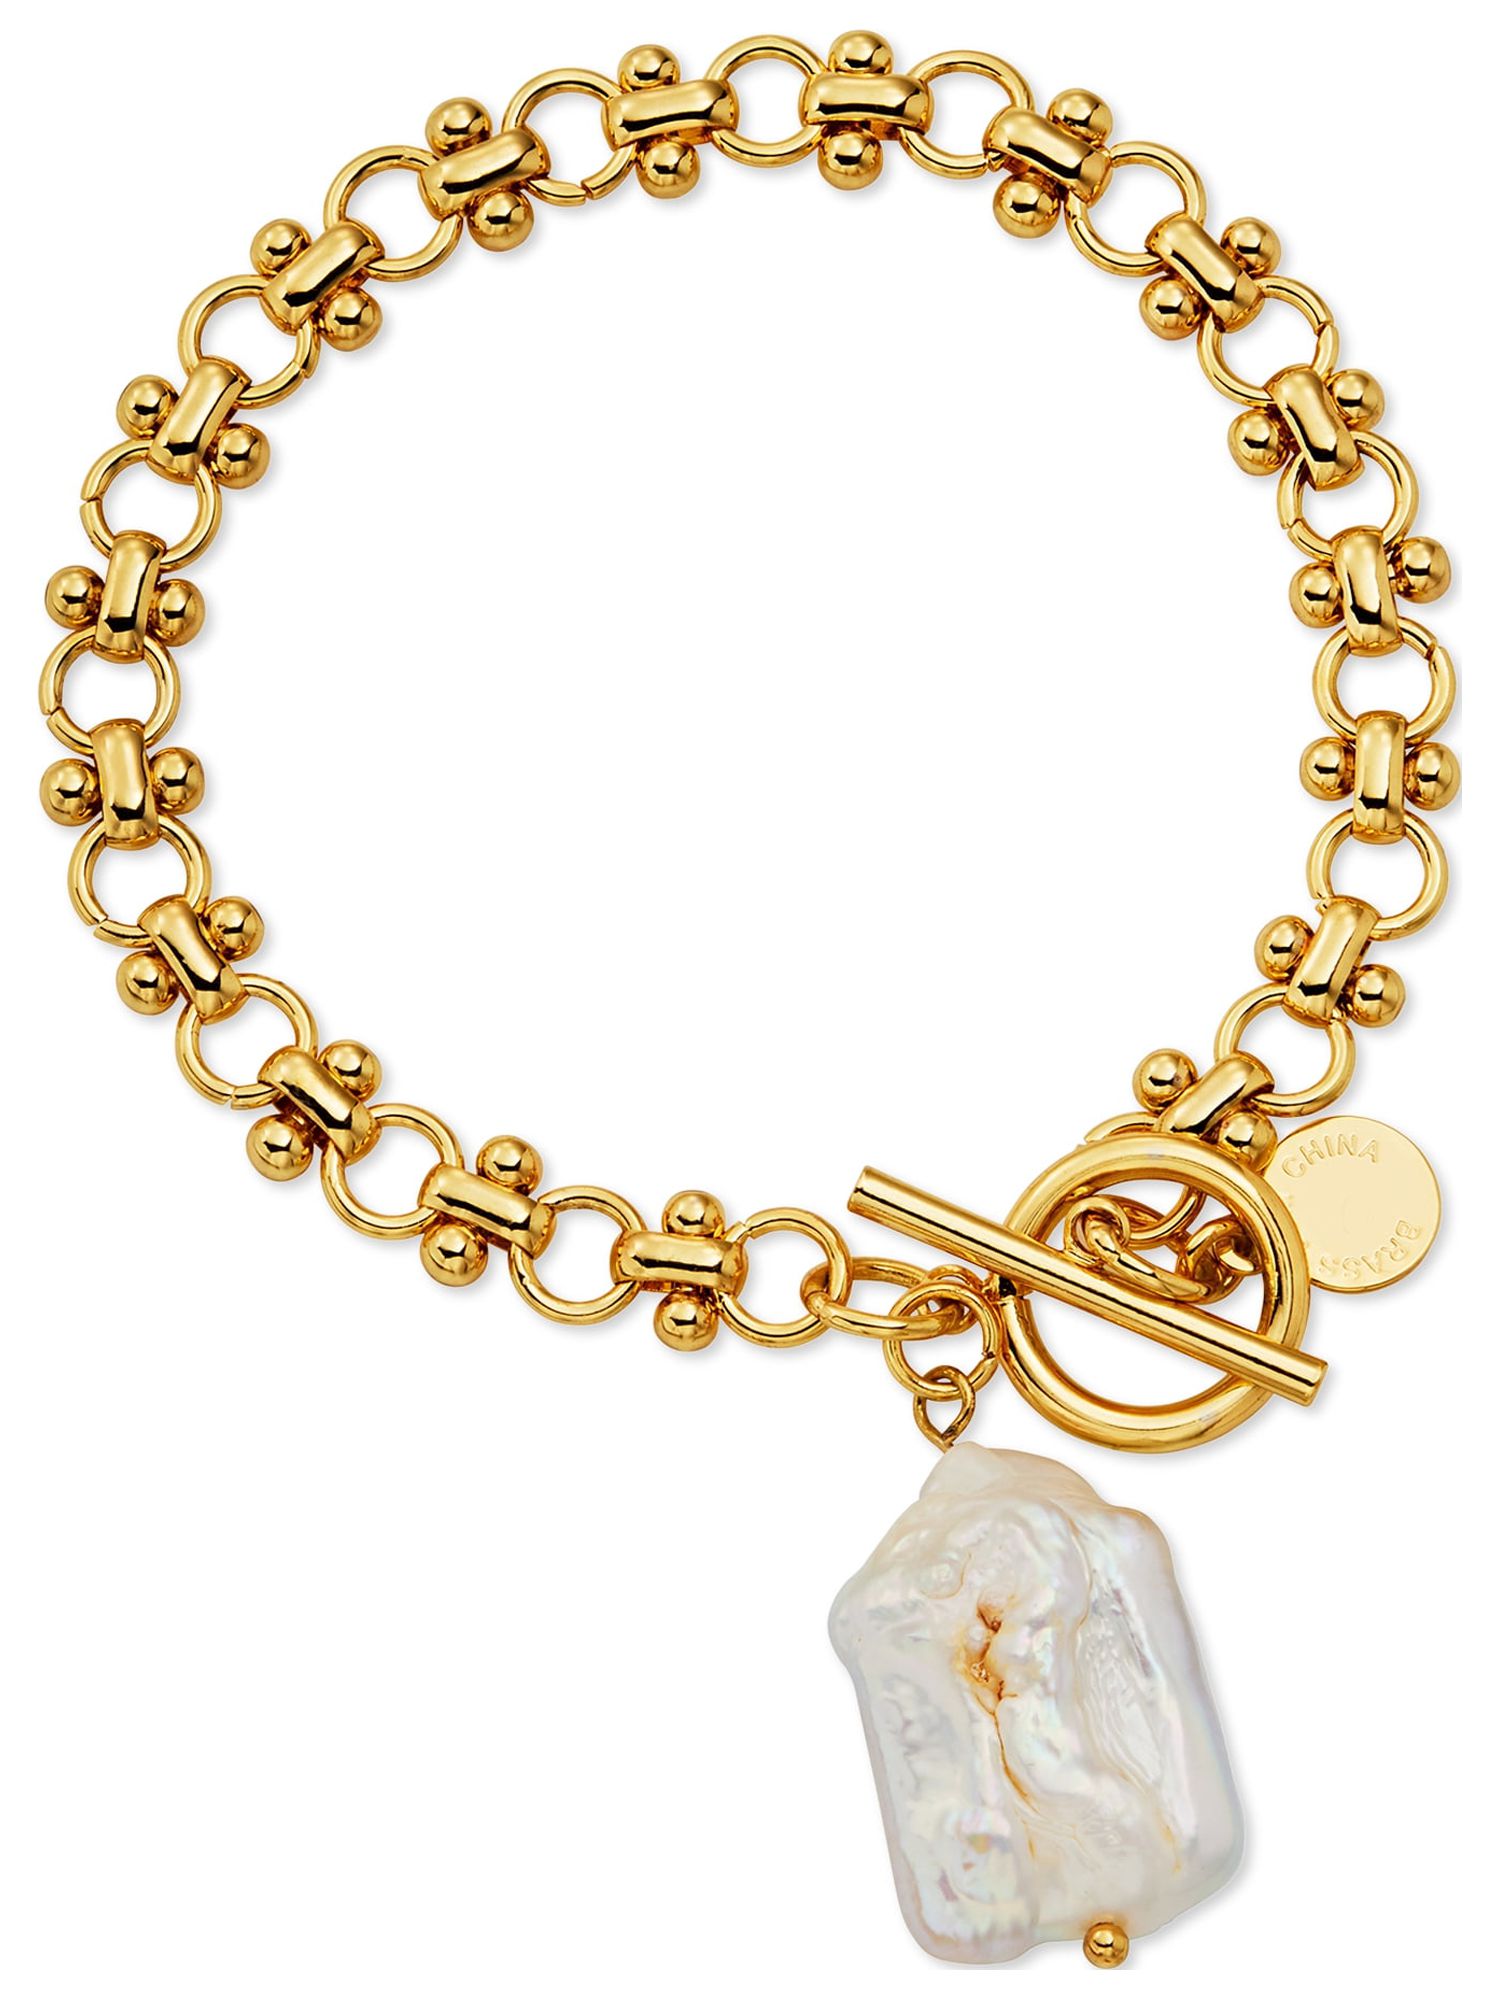 Scoop Womens Brass Yellow Gold-Plated Imitation Pearl Link Toggle Bracelet, 7.5'' - image 1 of 3